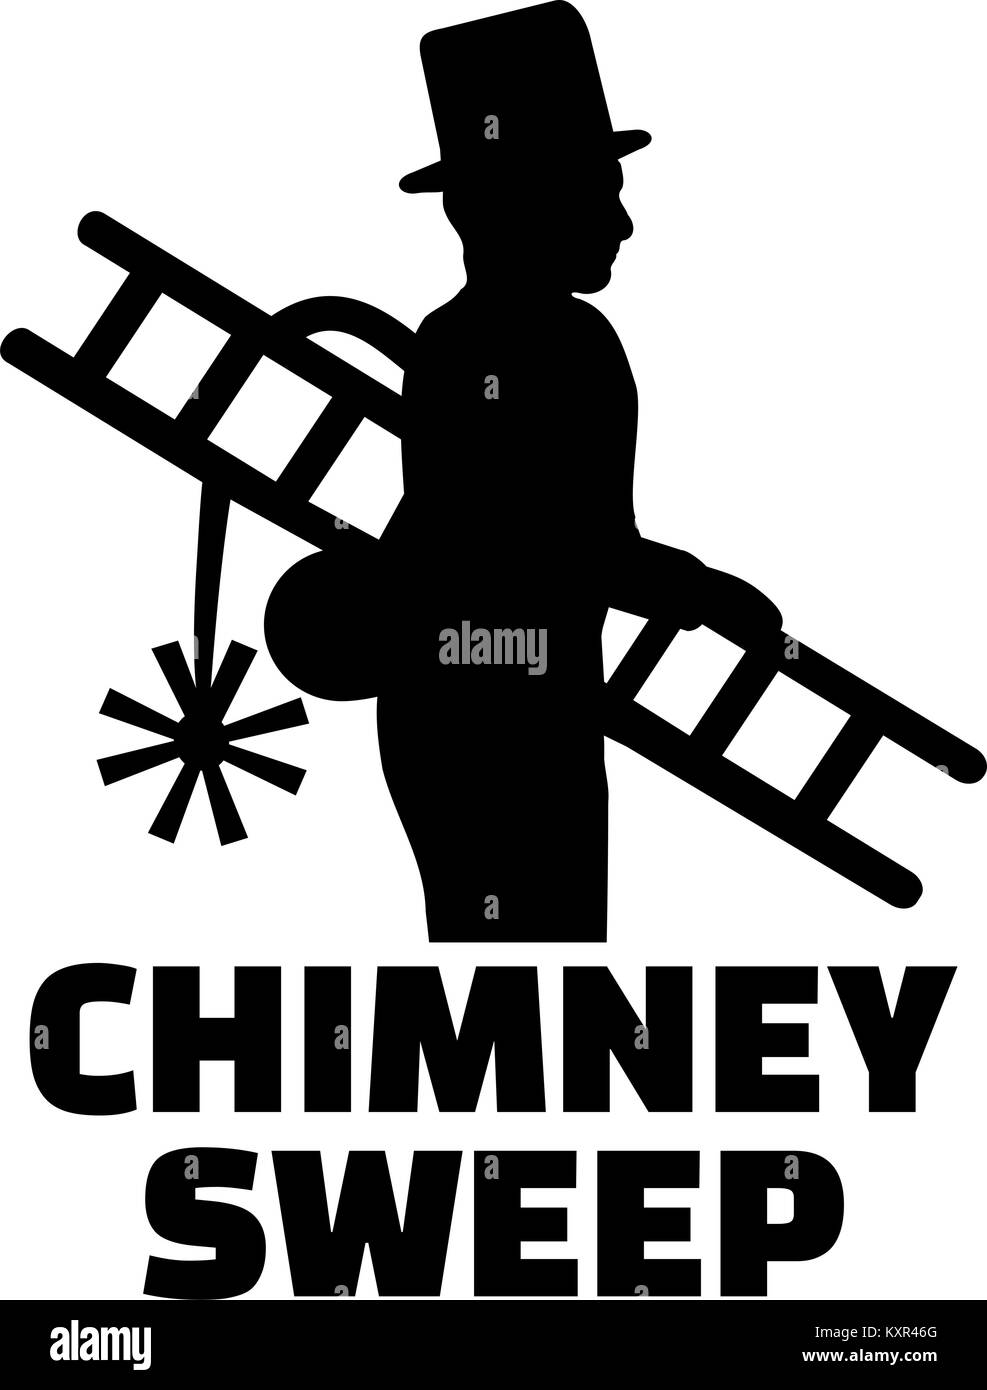 Chimney sweep silhouette with job title Stock Vector